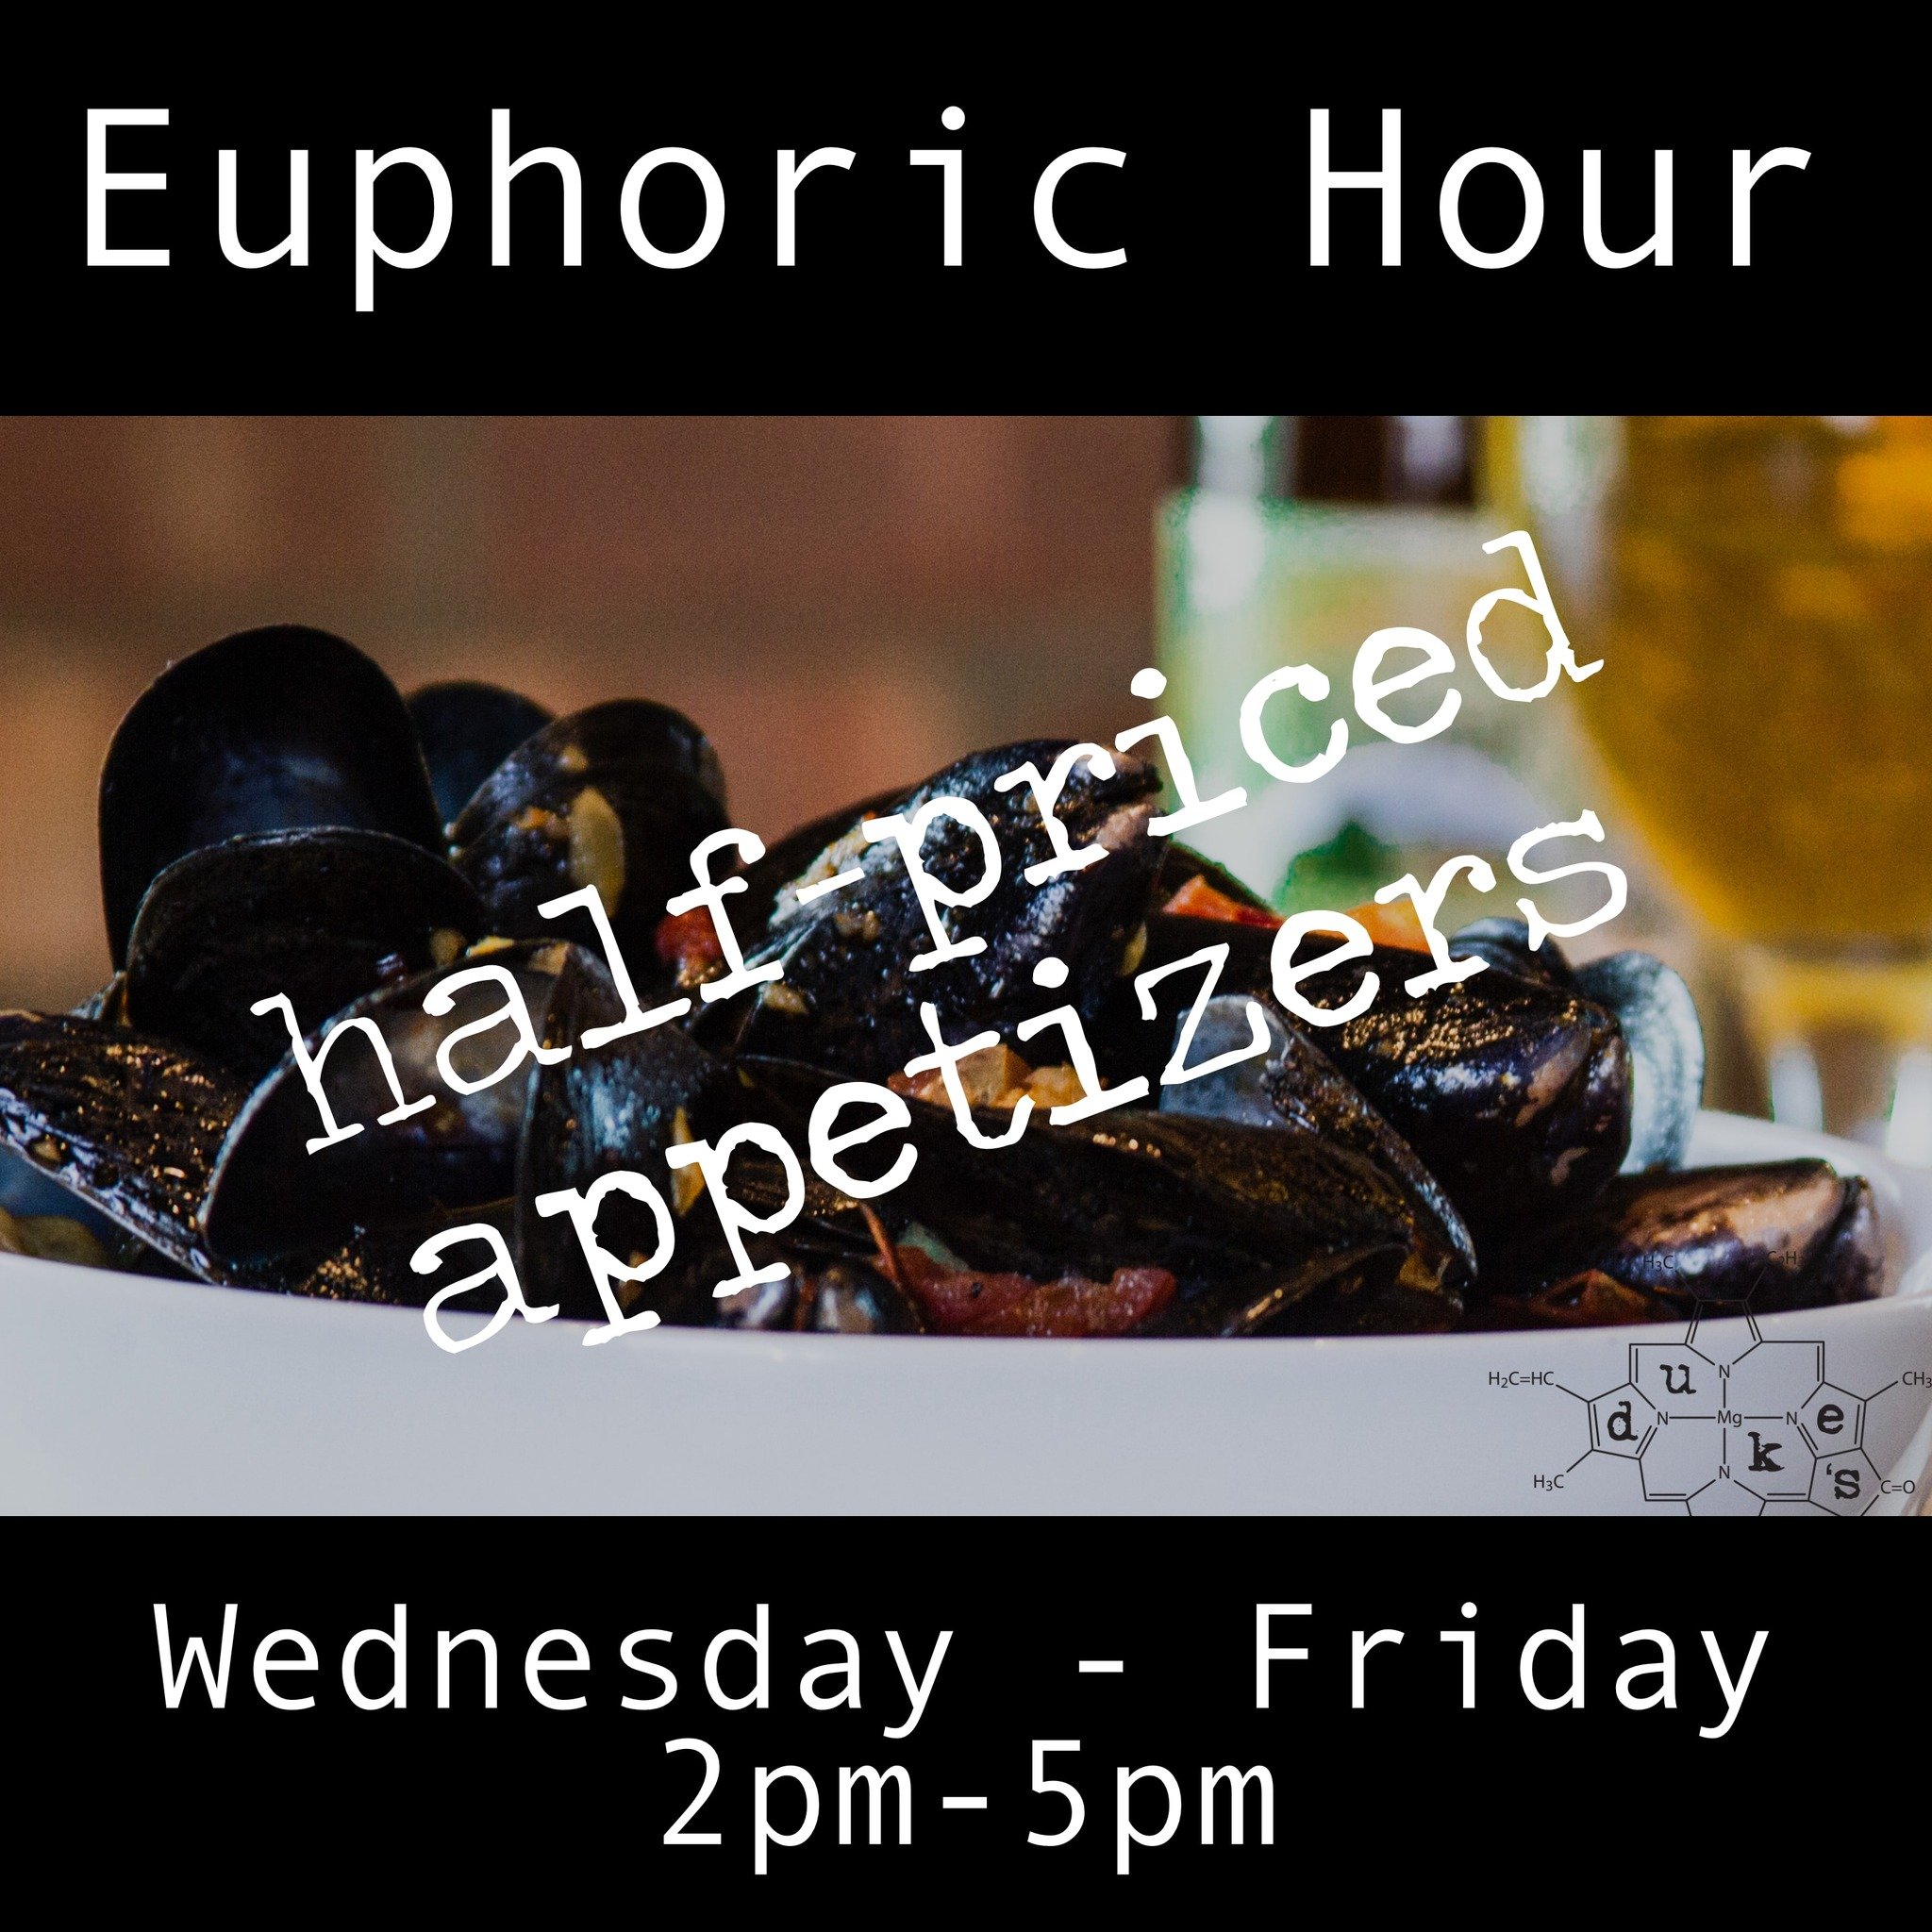 Duke's Euphoric Hour Continues in May with half-priced appetizers from 2pm-5pm! See you soon. #thedukeabides #euphorichour #HalfPriceApps #happyhour #downtowncrystallake